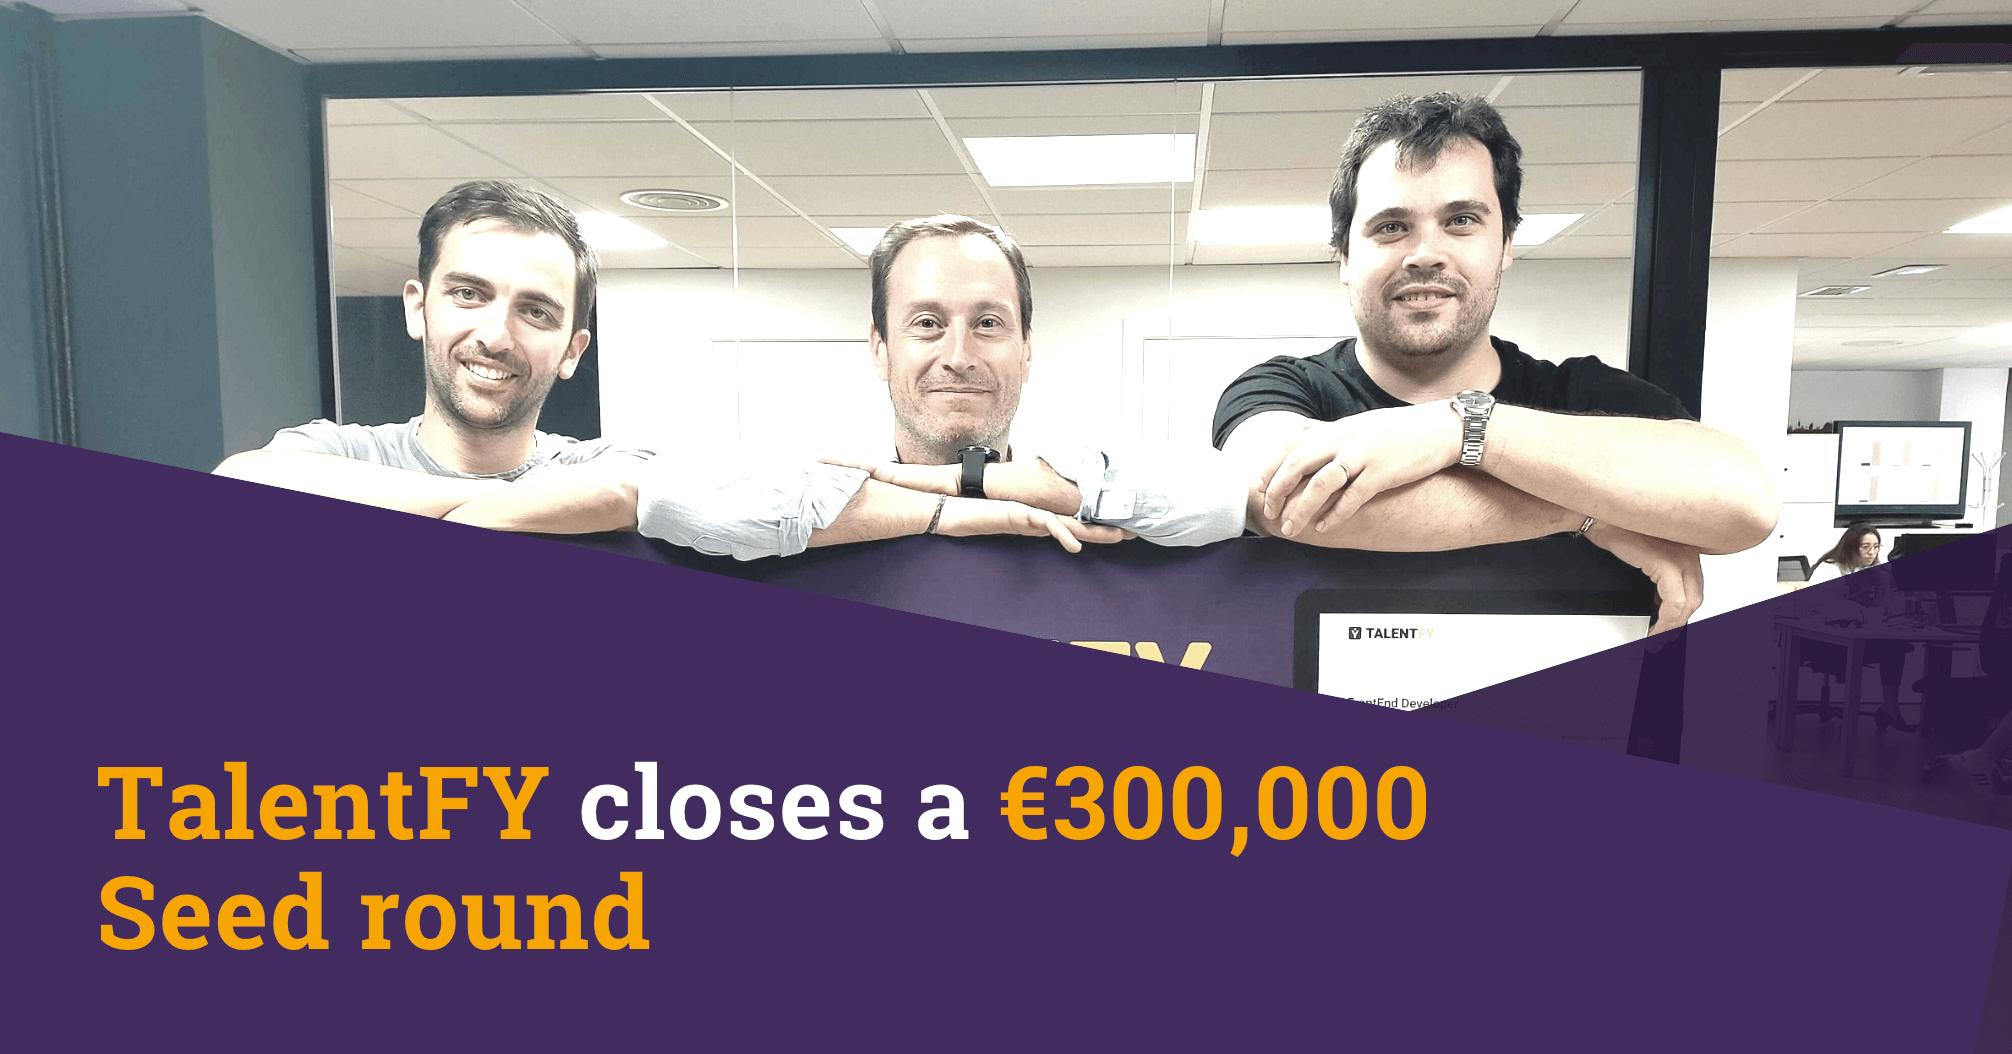 TalentFY closes a €300,000 Seed round